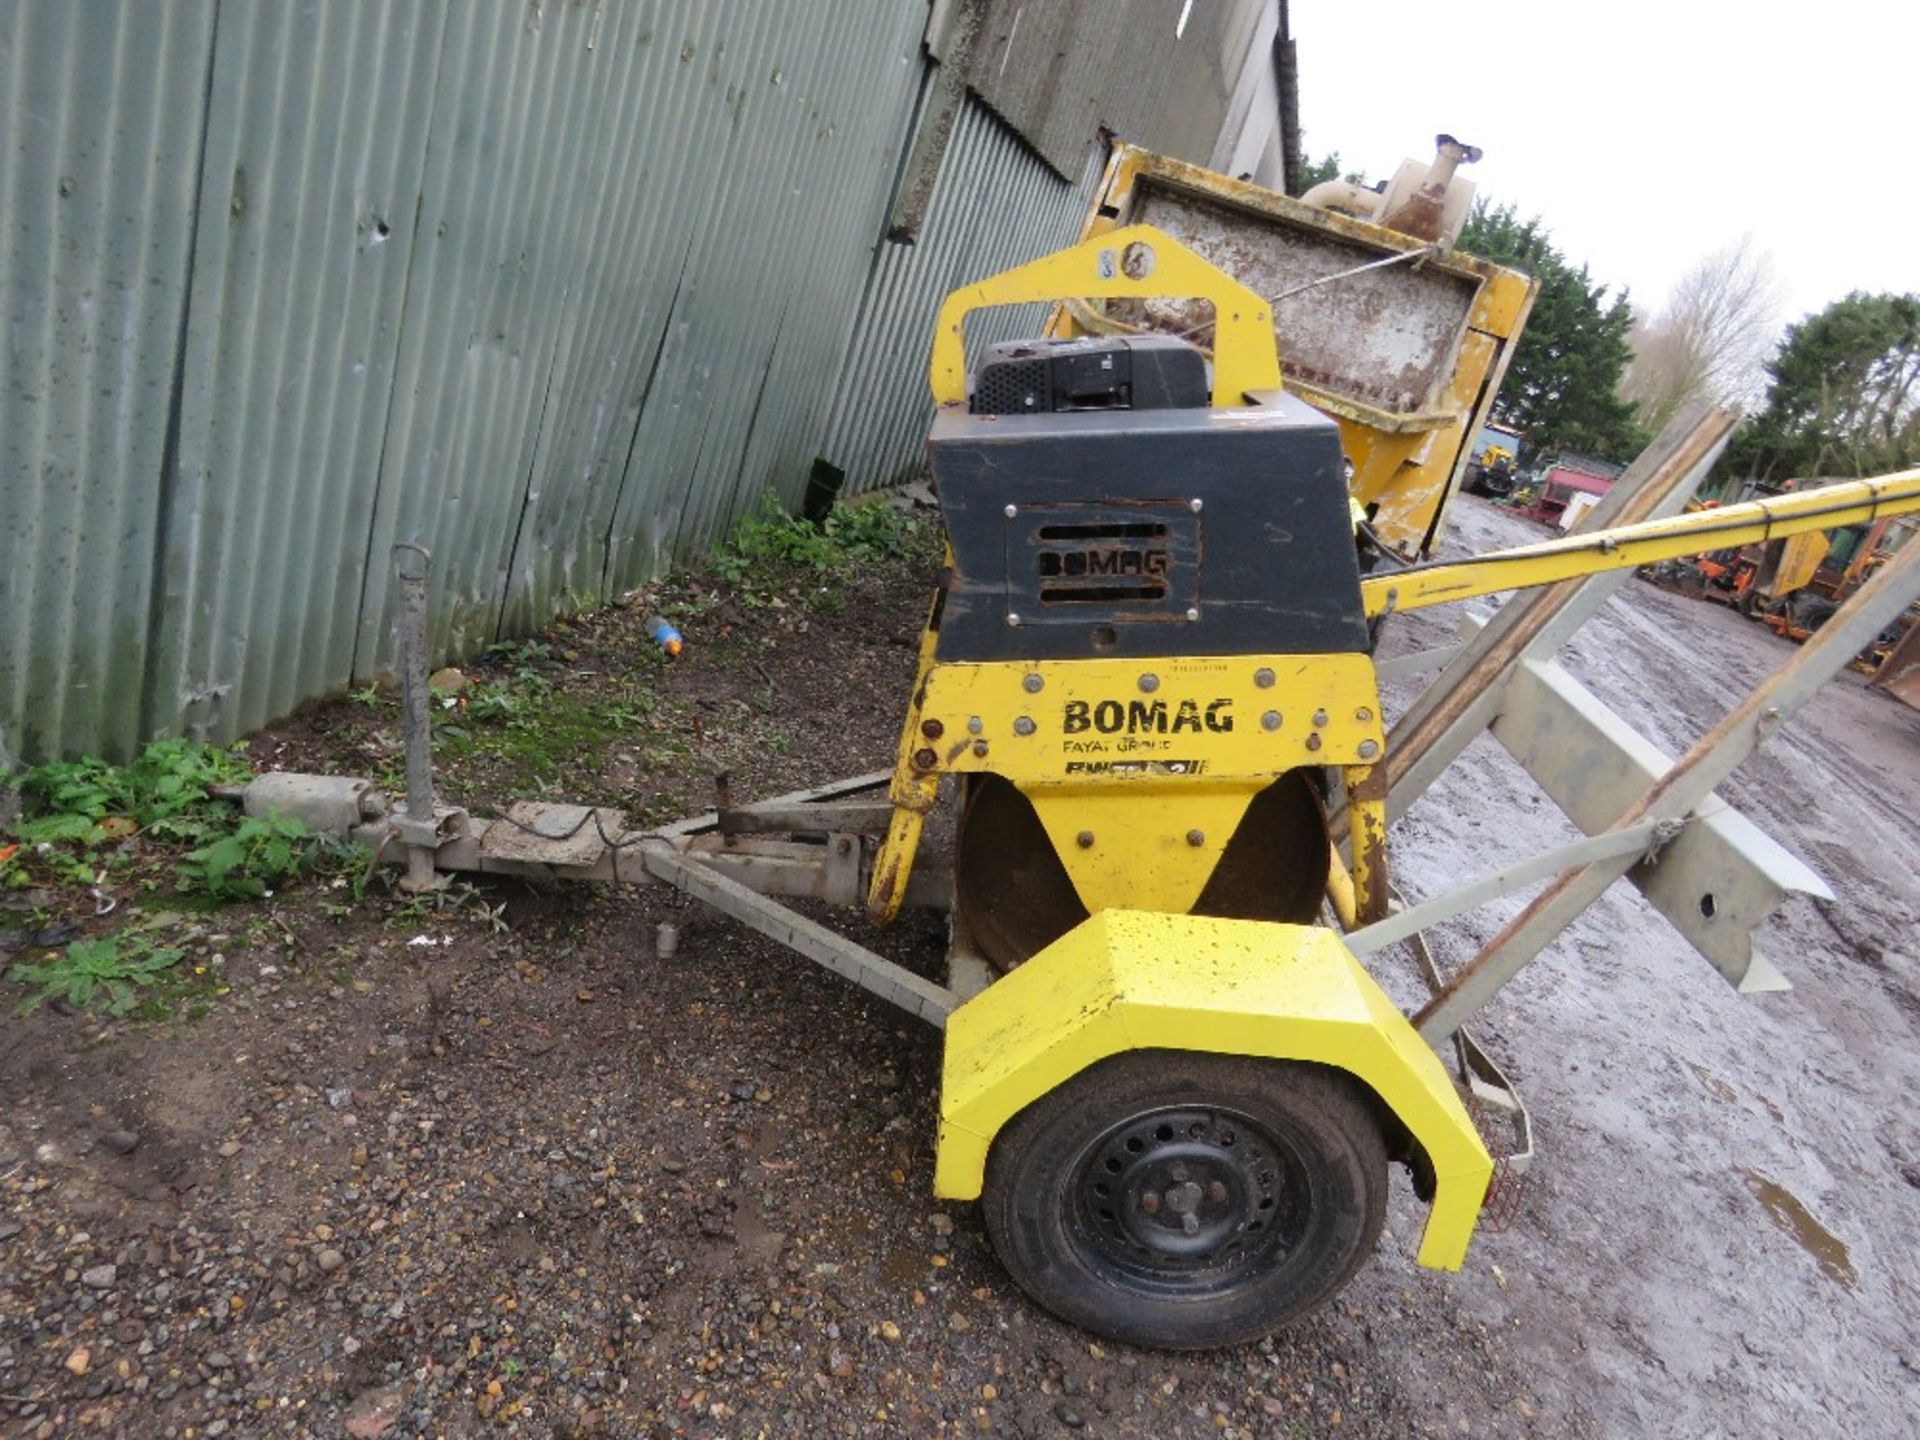 BOMAG BW71E-2 SINGLE DRUM ROLLER ON A TRAILER YEAR 2017 BUILD. SN: 101620291368. SOURCED FROM LARGE - Image 3 of 8